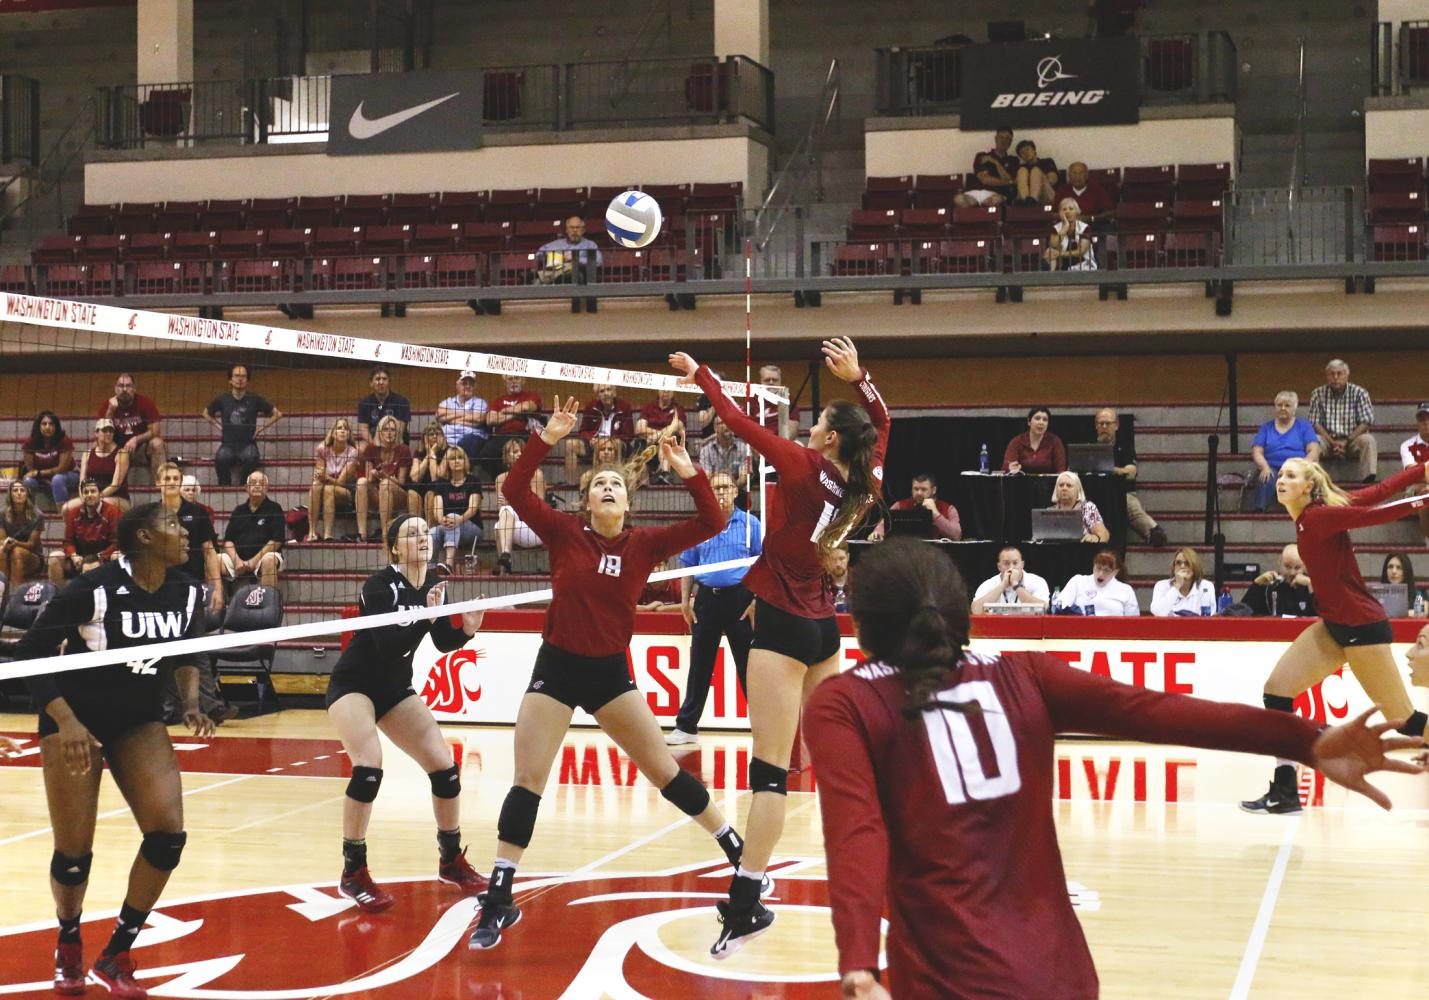 WSU+sets+the+ball+and+prepares+to+spike+against+Incarnate+Word+during+the+Cougar+Challenge+on+Thursday%2C+August+31.